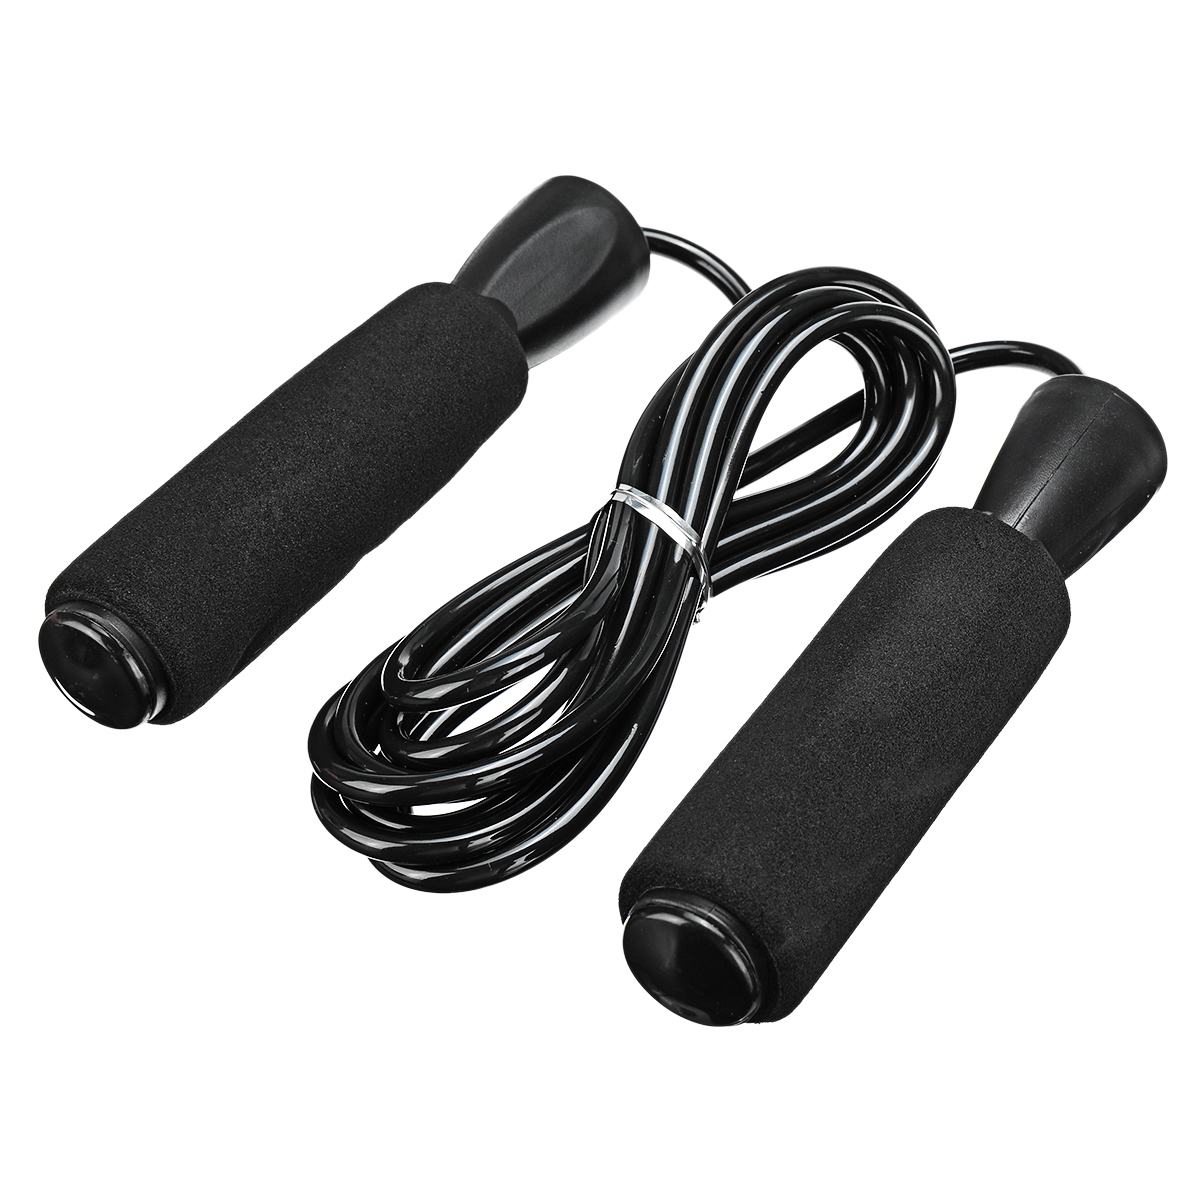 7-PcsSet-Ab-Rollers-Kit-Push-UP-Bar-Jump-Rope-Hand-Gripper-Knee-Pad-Resistance-Band-Exercise-Trainin-1810079-9